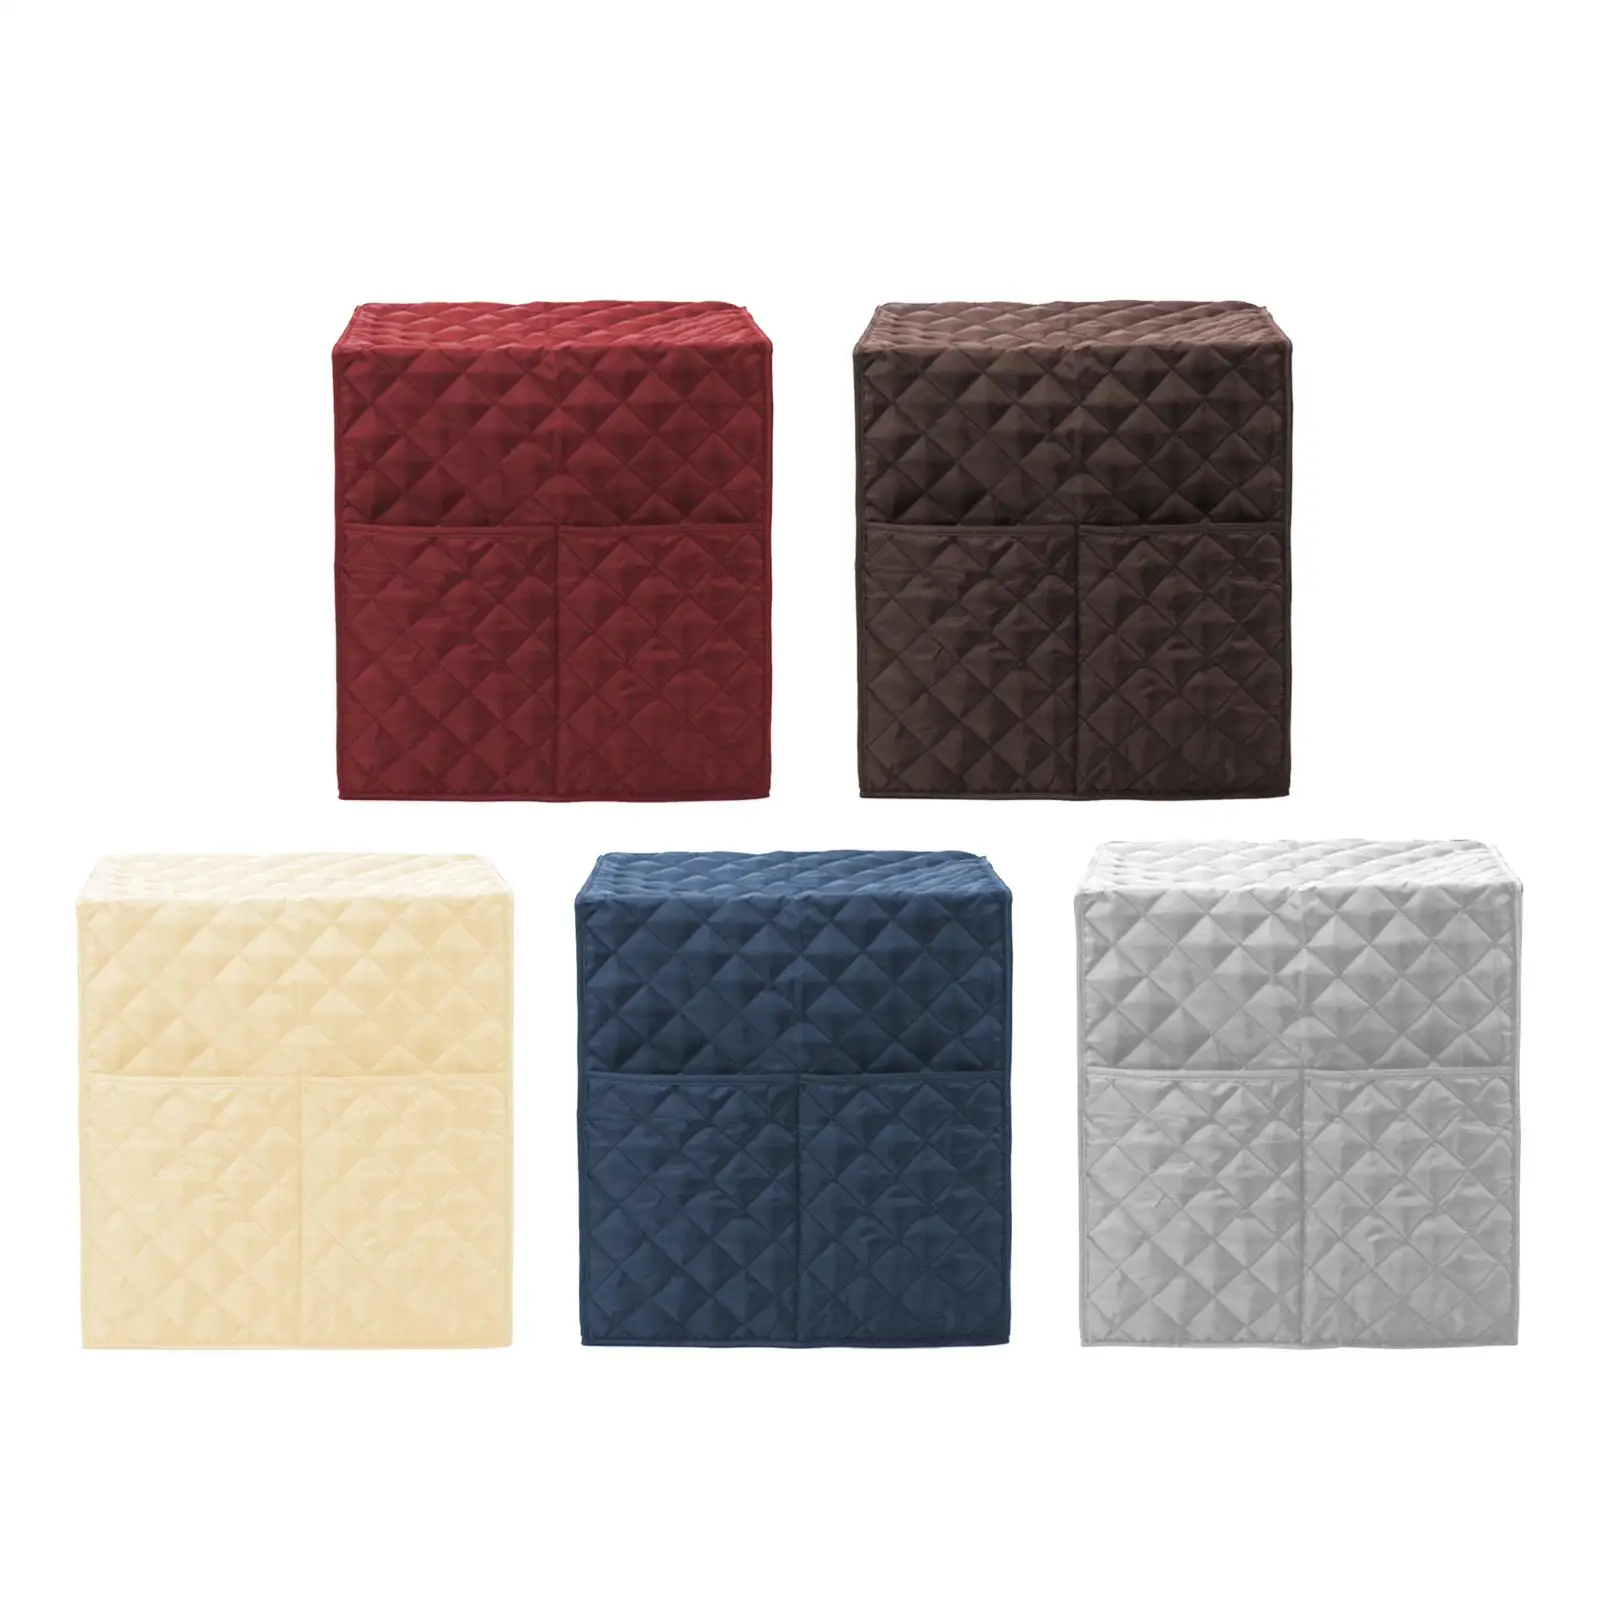 Coffee Maker Appliance Cover Kitchen Appliance Covers Espresso Machine Quilted Protective Cover